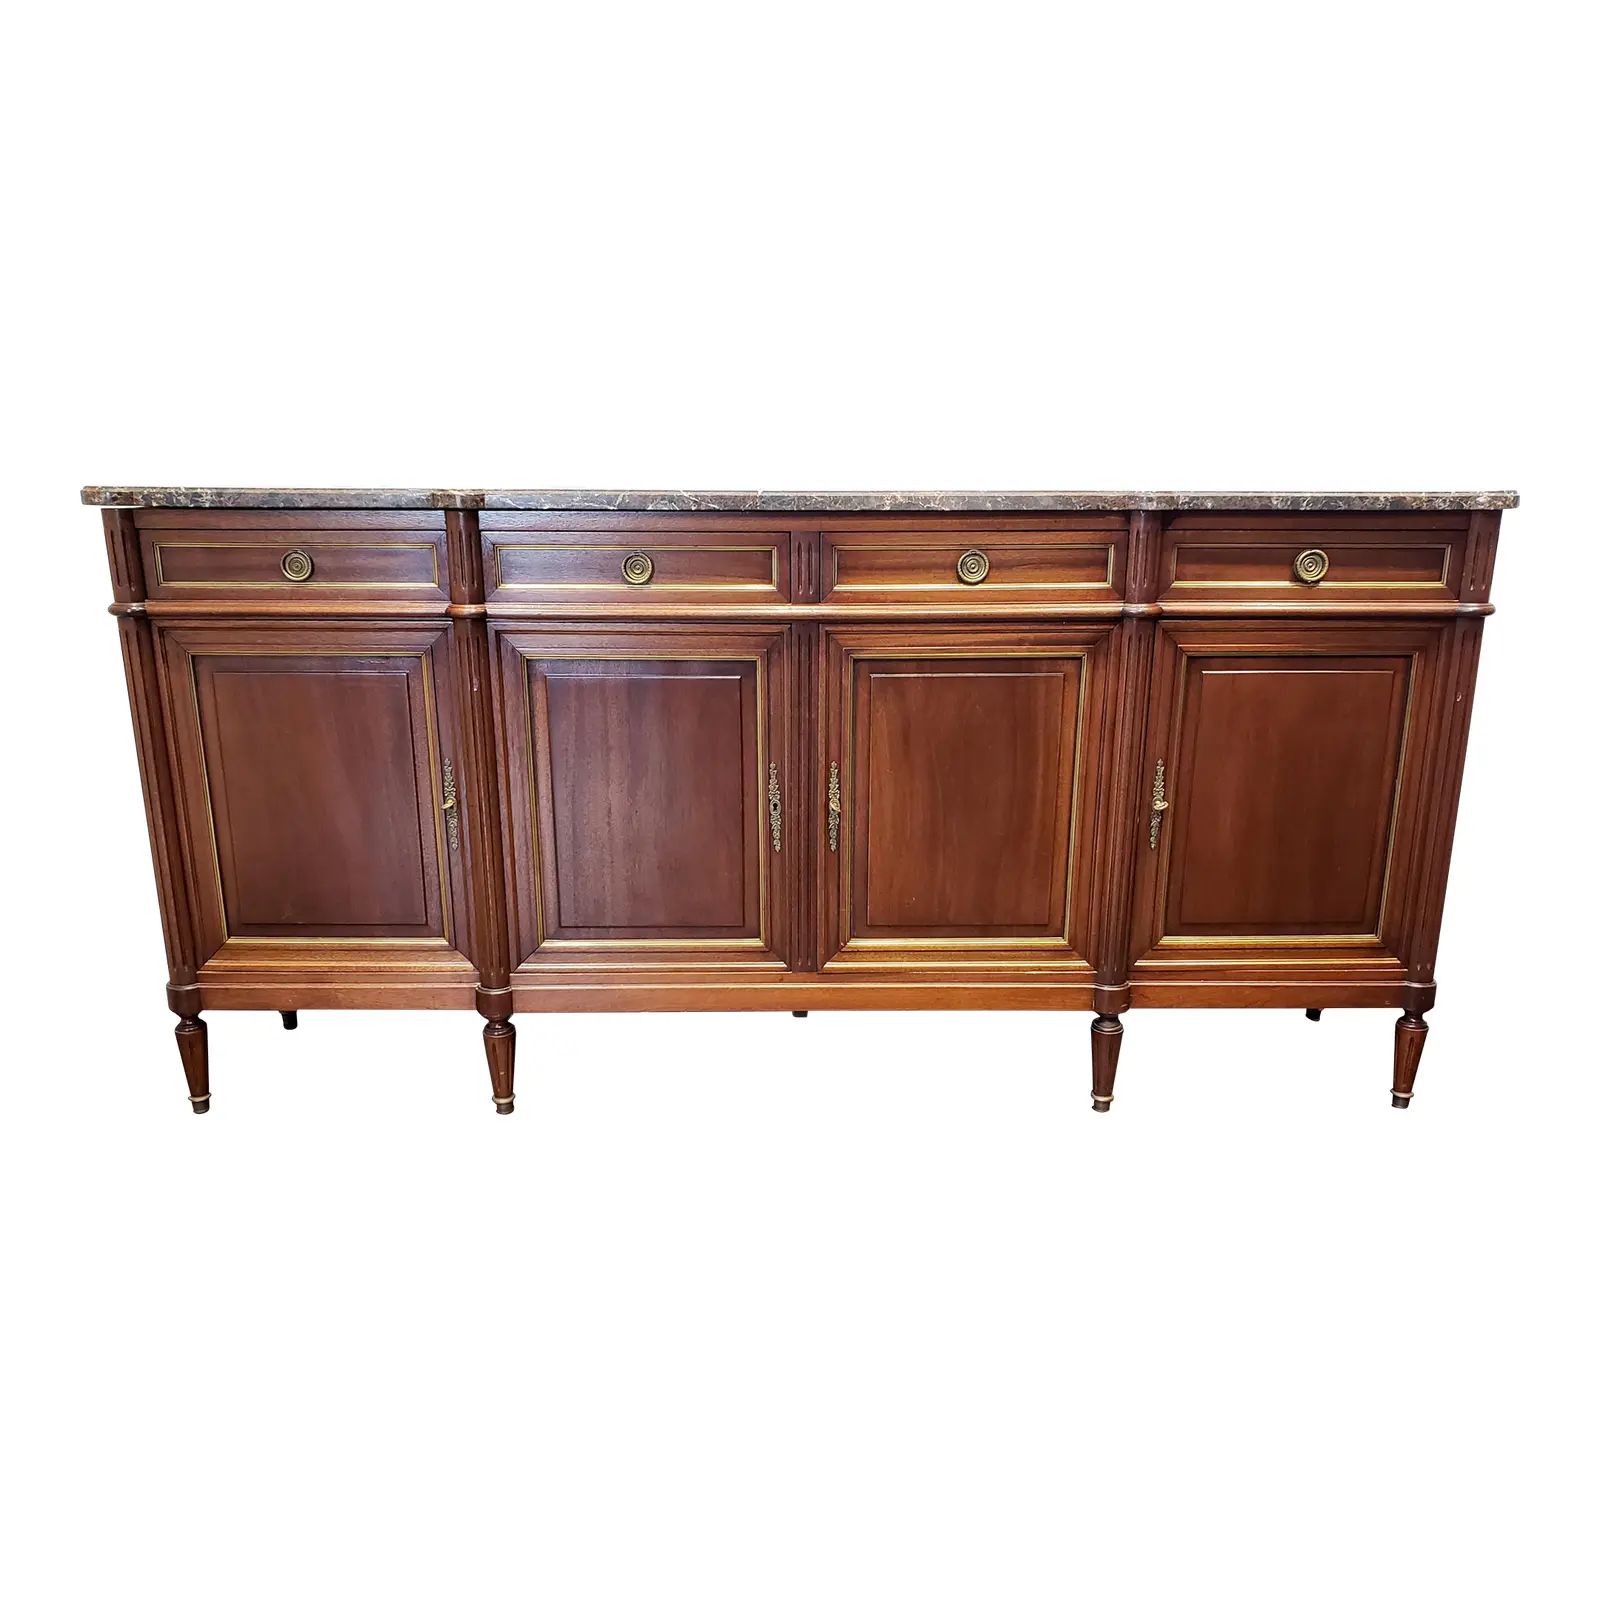 Antique French Louis XVI Style Marble and Mahogany Buffet Sideboard | Chairish